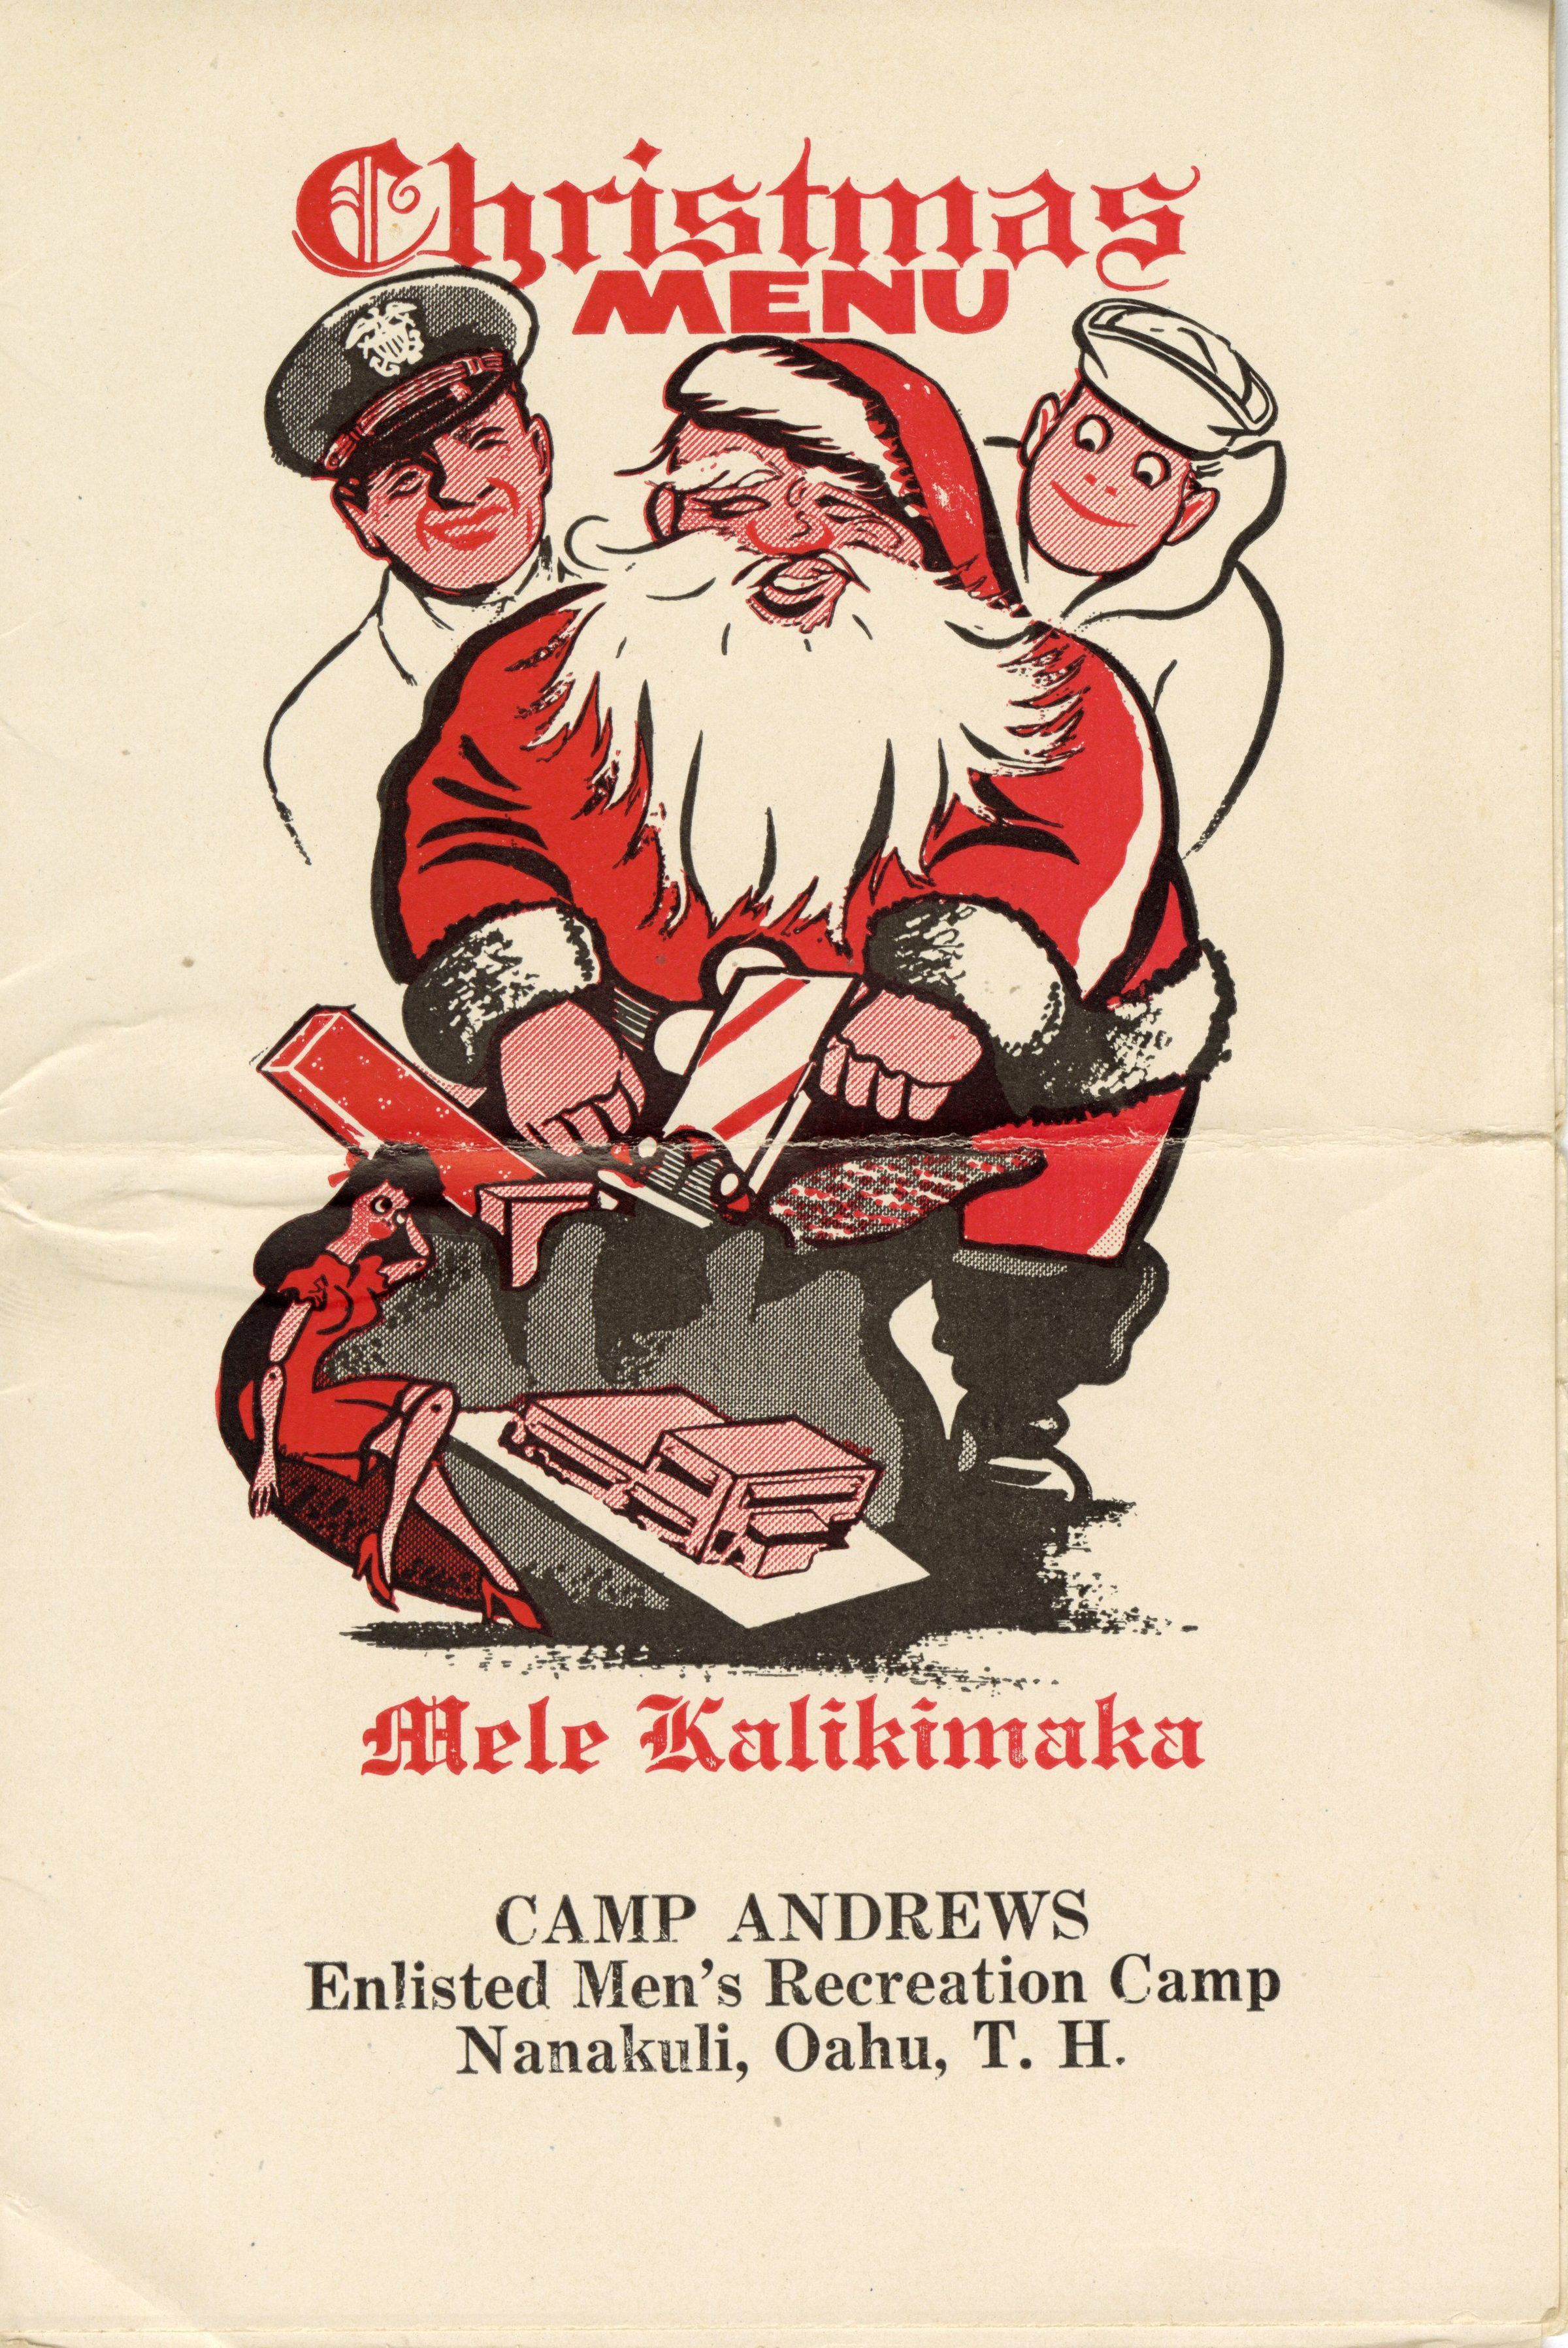 Primary Image of Christmas Menu from Camp Andrews on Oahu, Hawaii, December 25, 1945